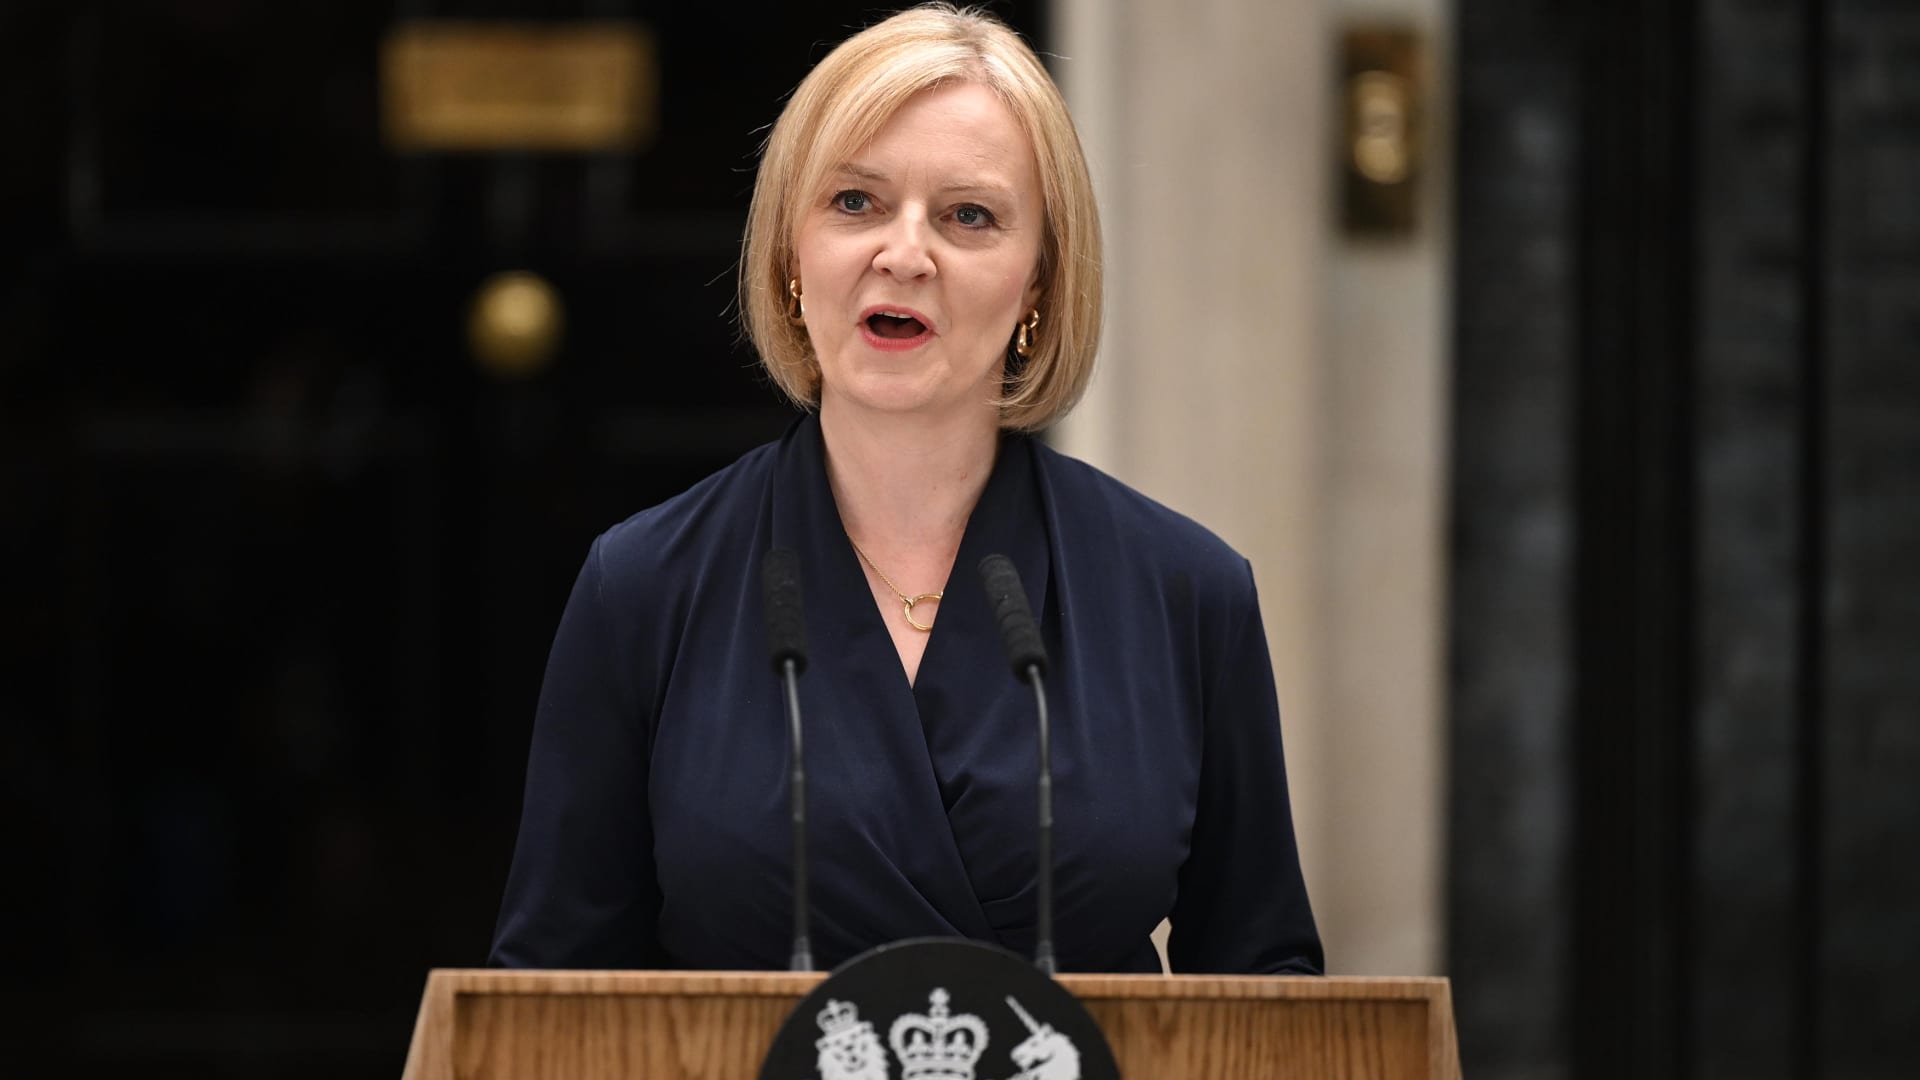 ‘We can ride out the storm’: Liz Truss promises immediate action on energy bills in first speech as UK PM